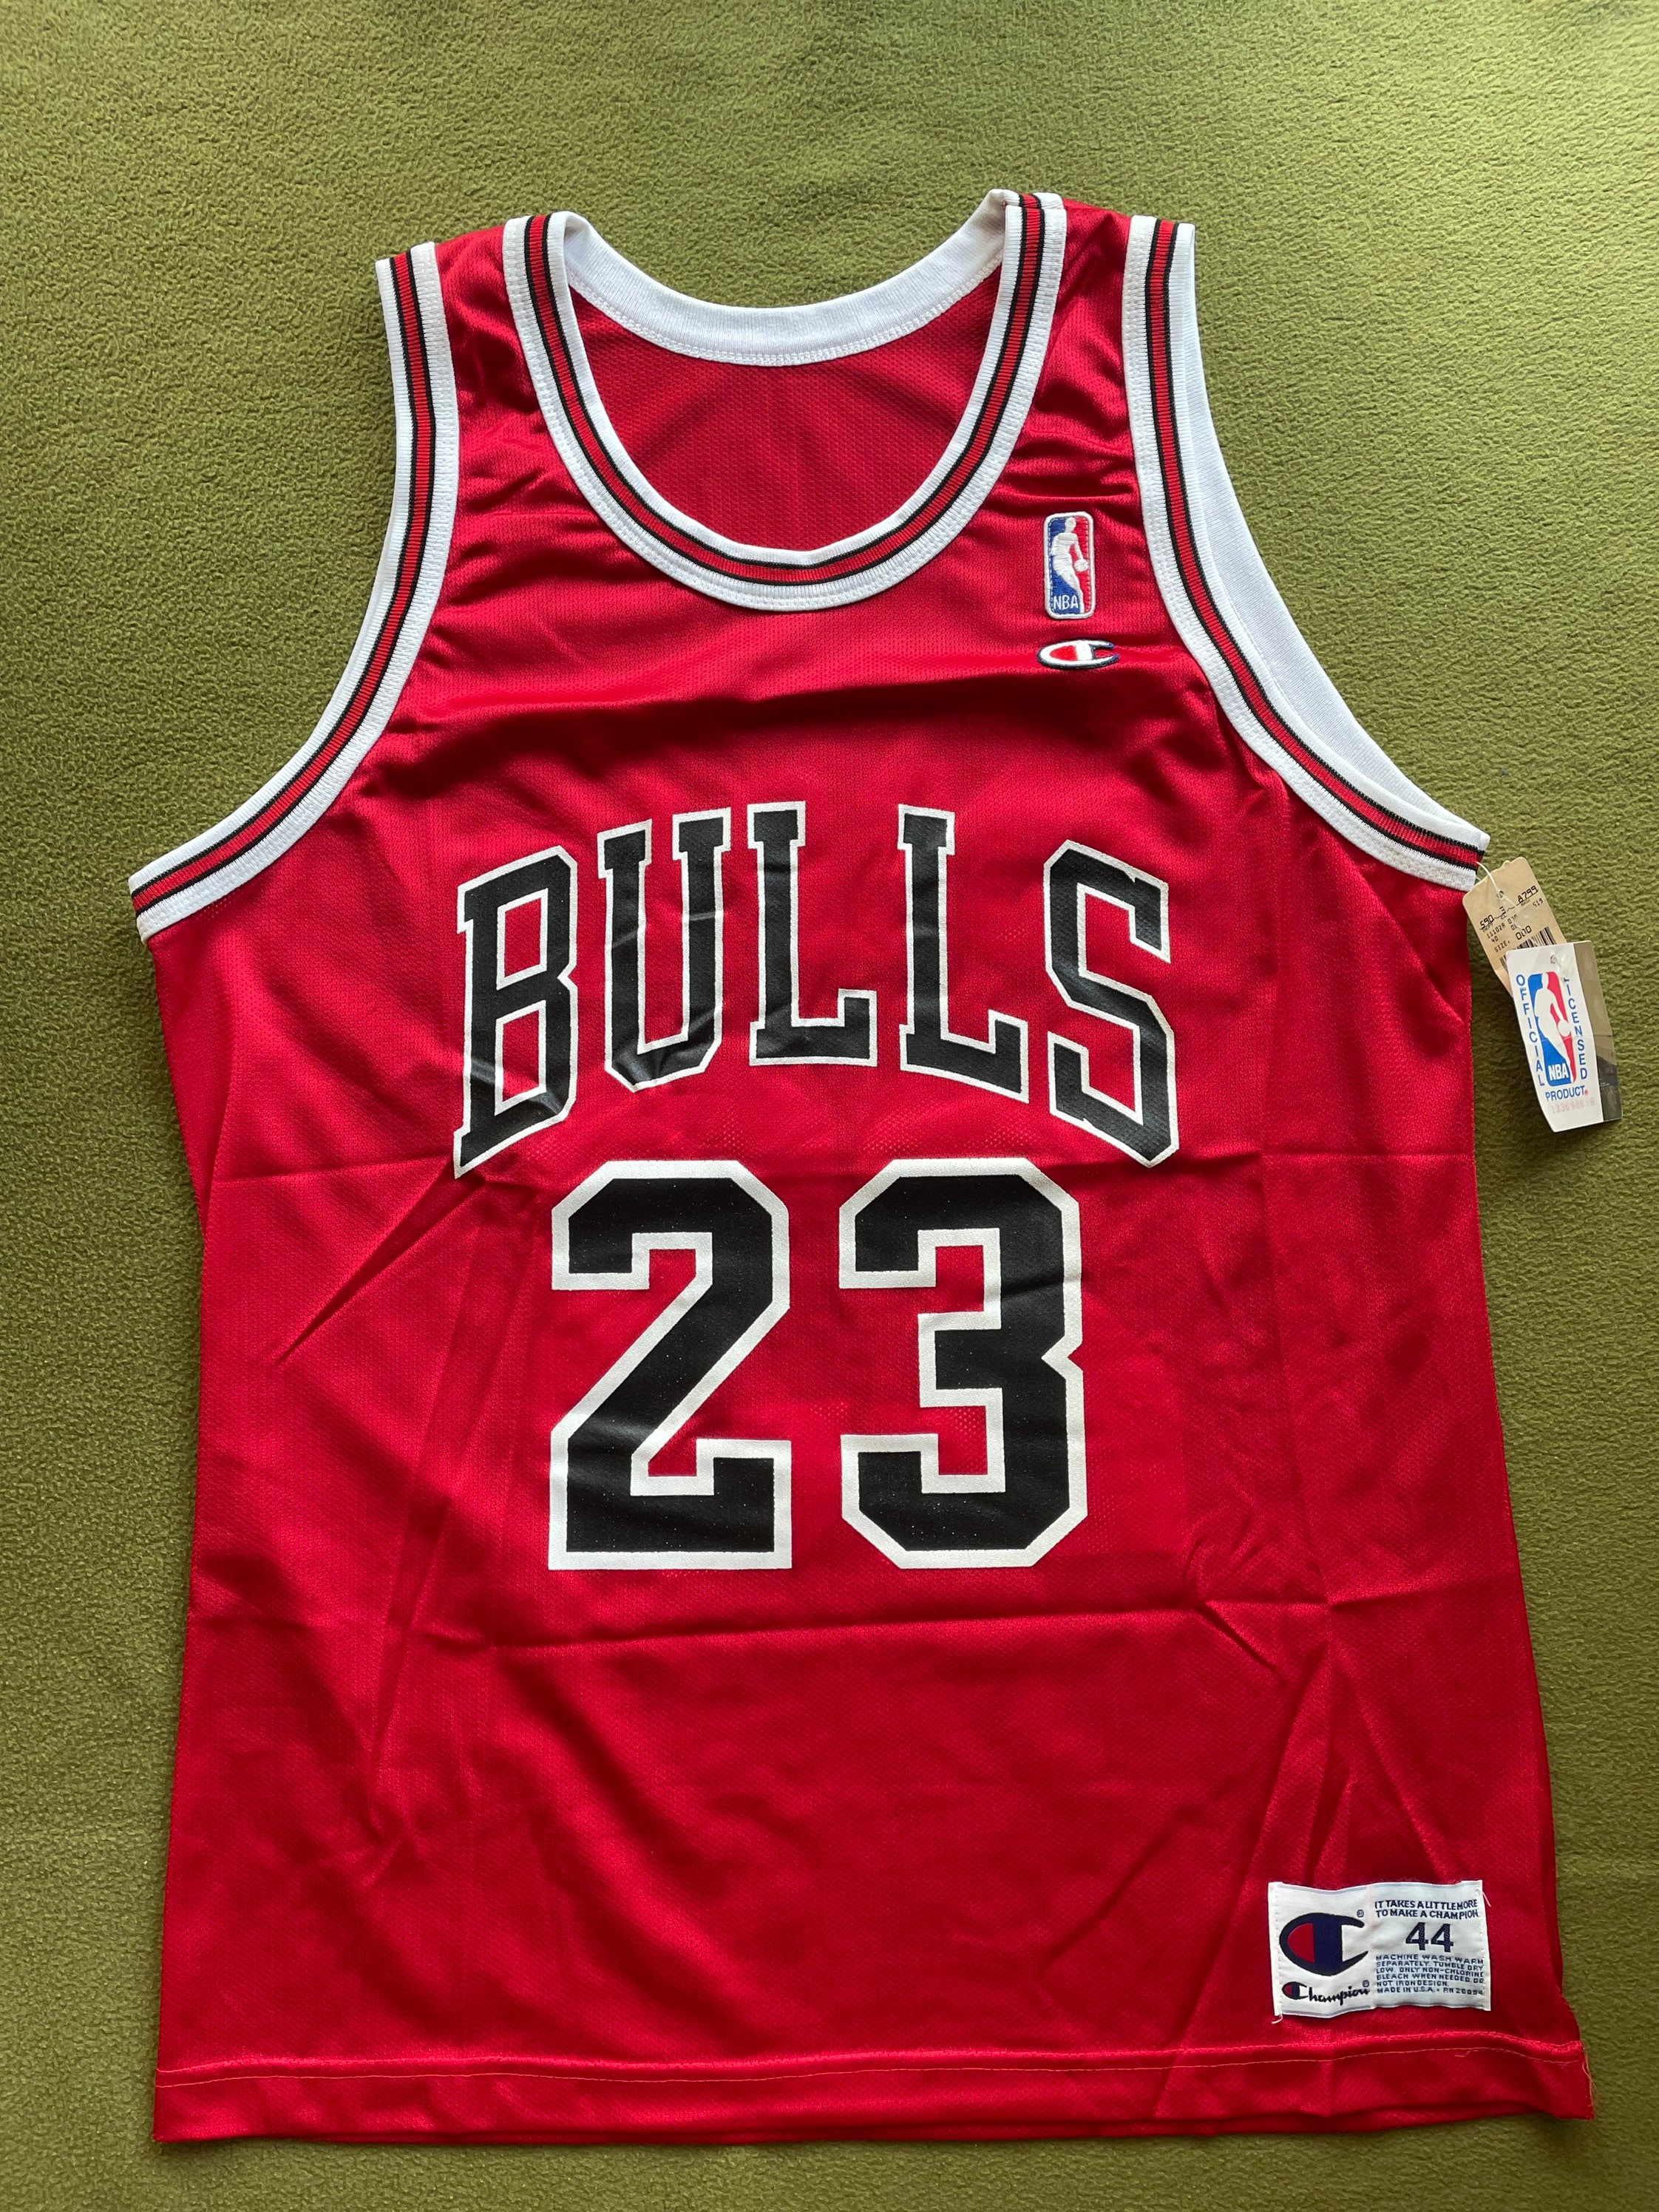 NWT Scottie Pippen Champion Jersey 44 Large Chicago Bulls 50th Anniversary  Gold